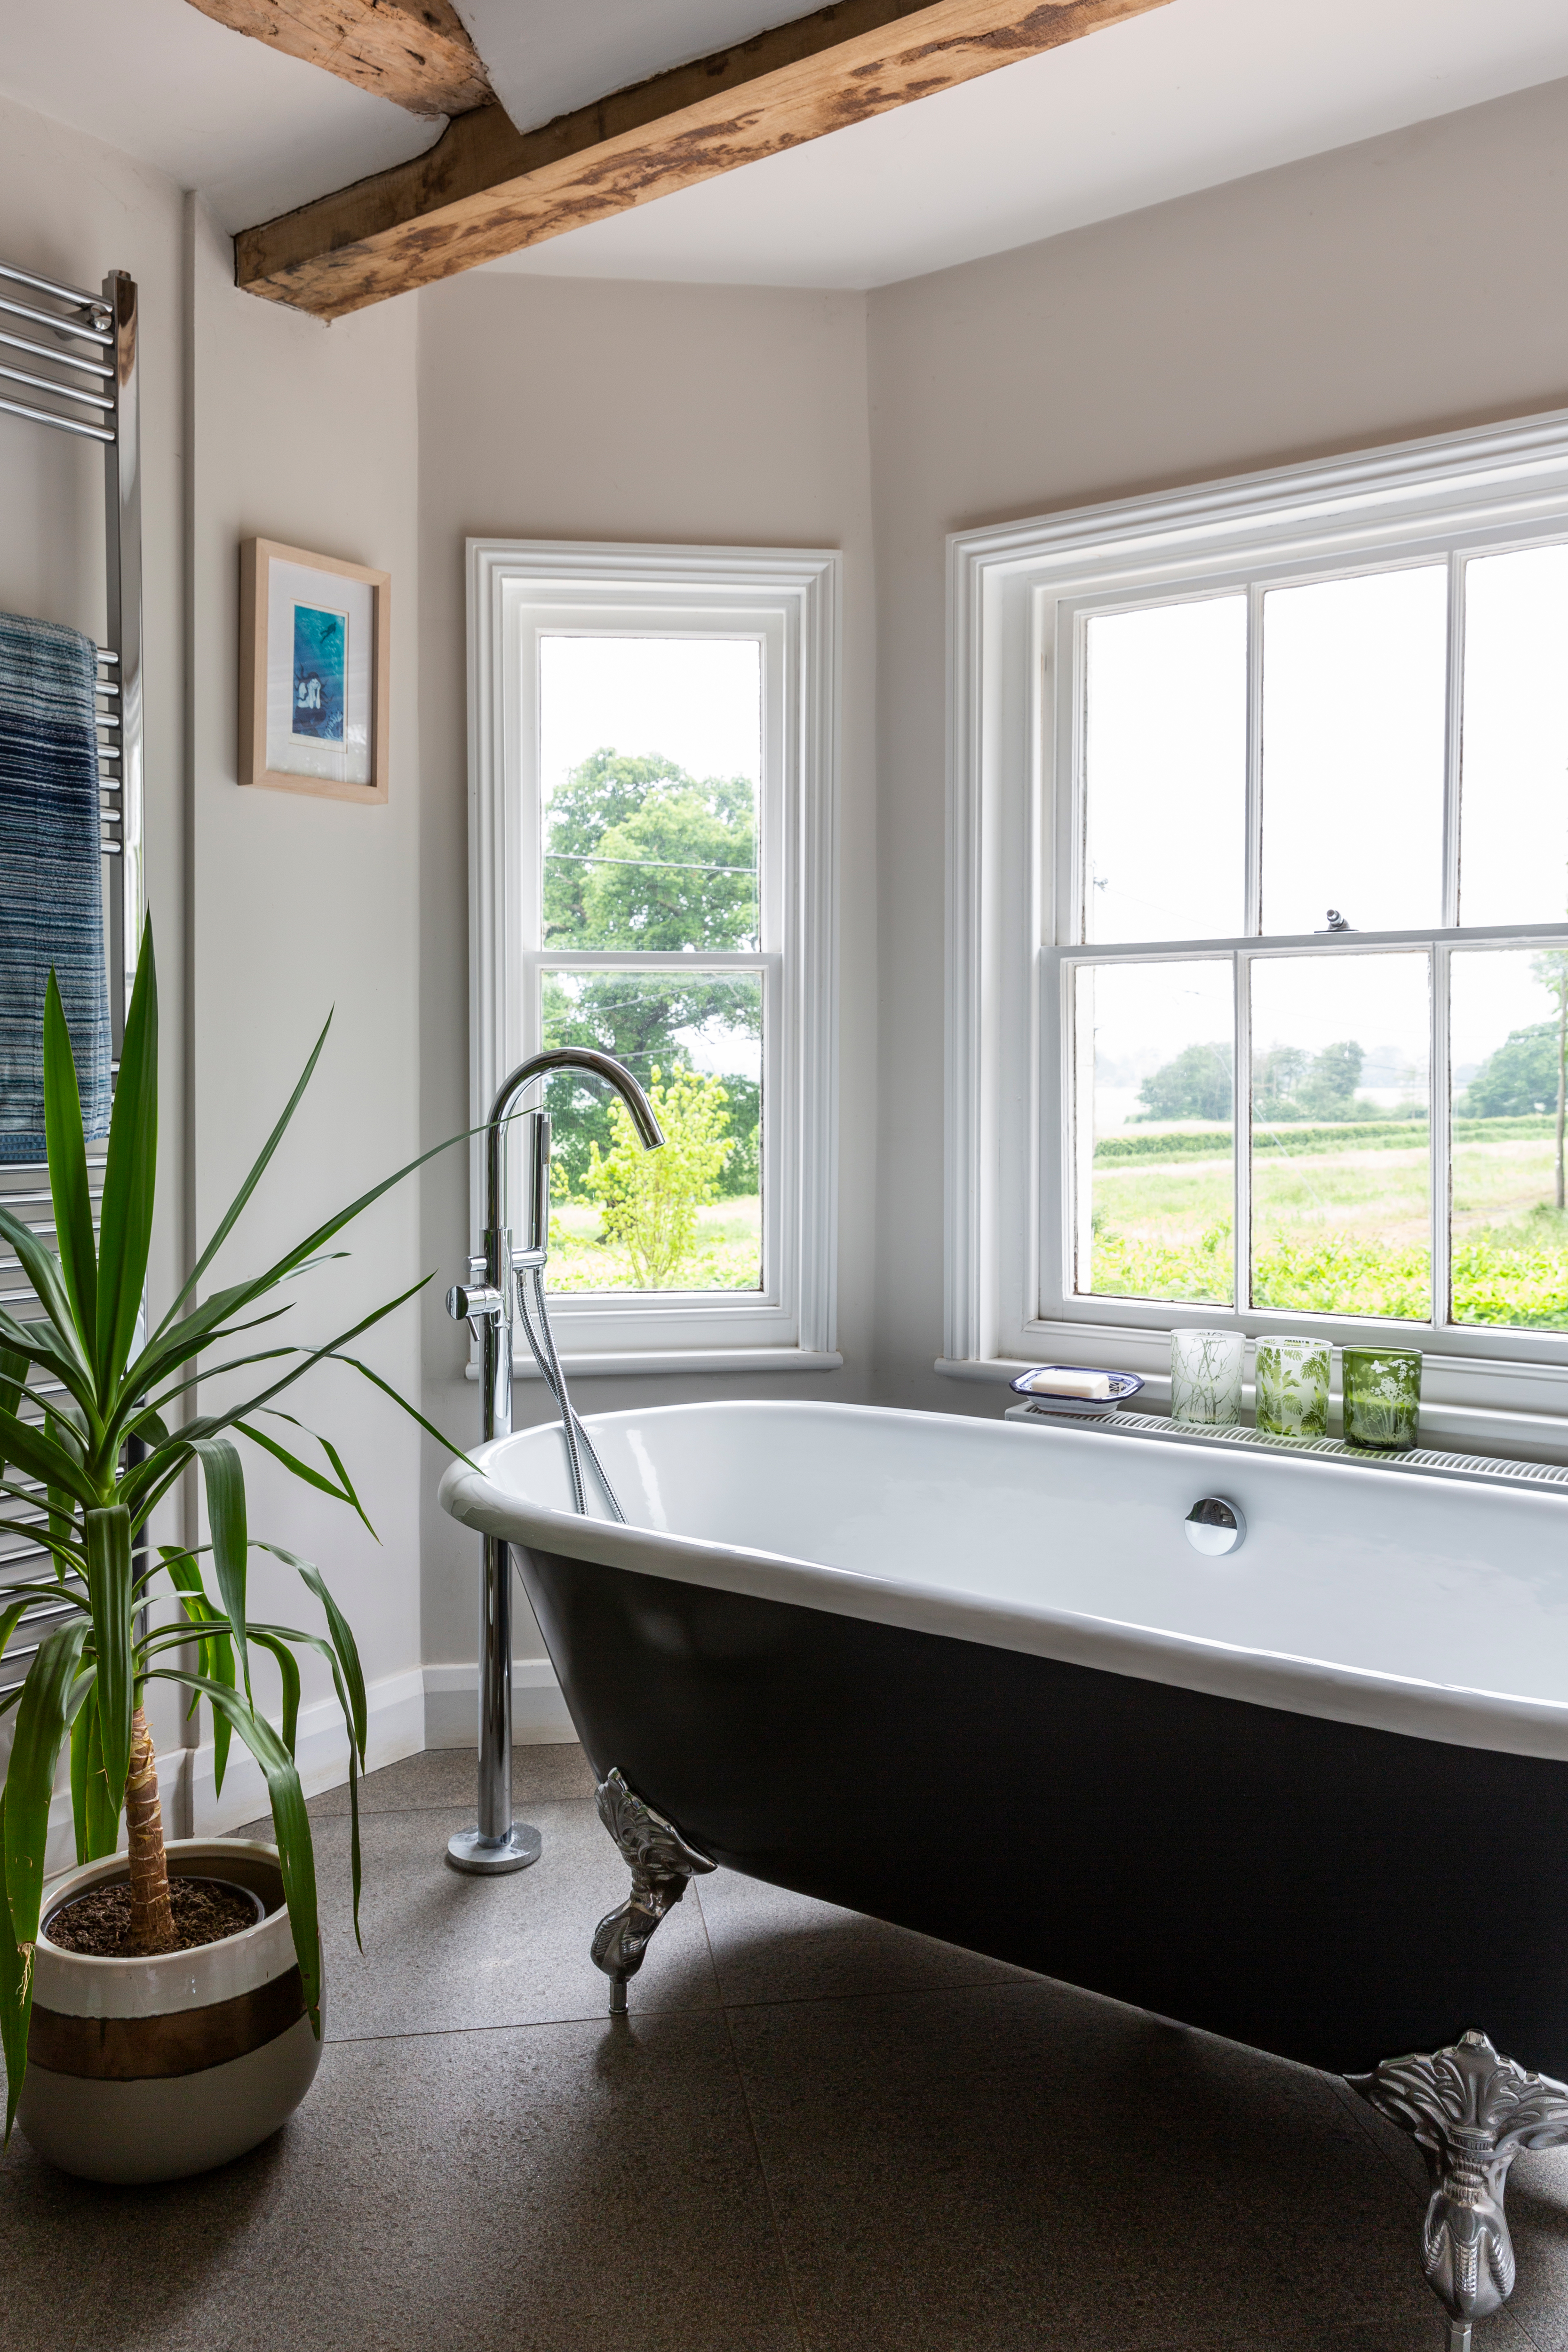 How Much Does A New Bathroom Cost, How Much Does It Cost To Renew A Bathroom Uk